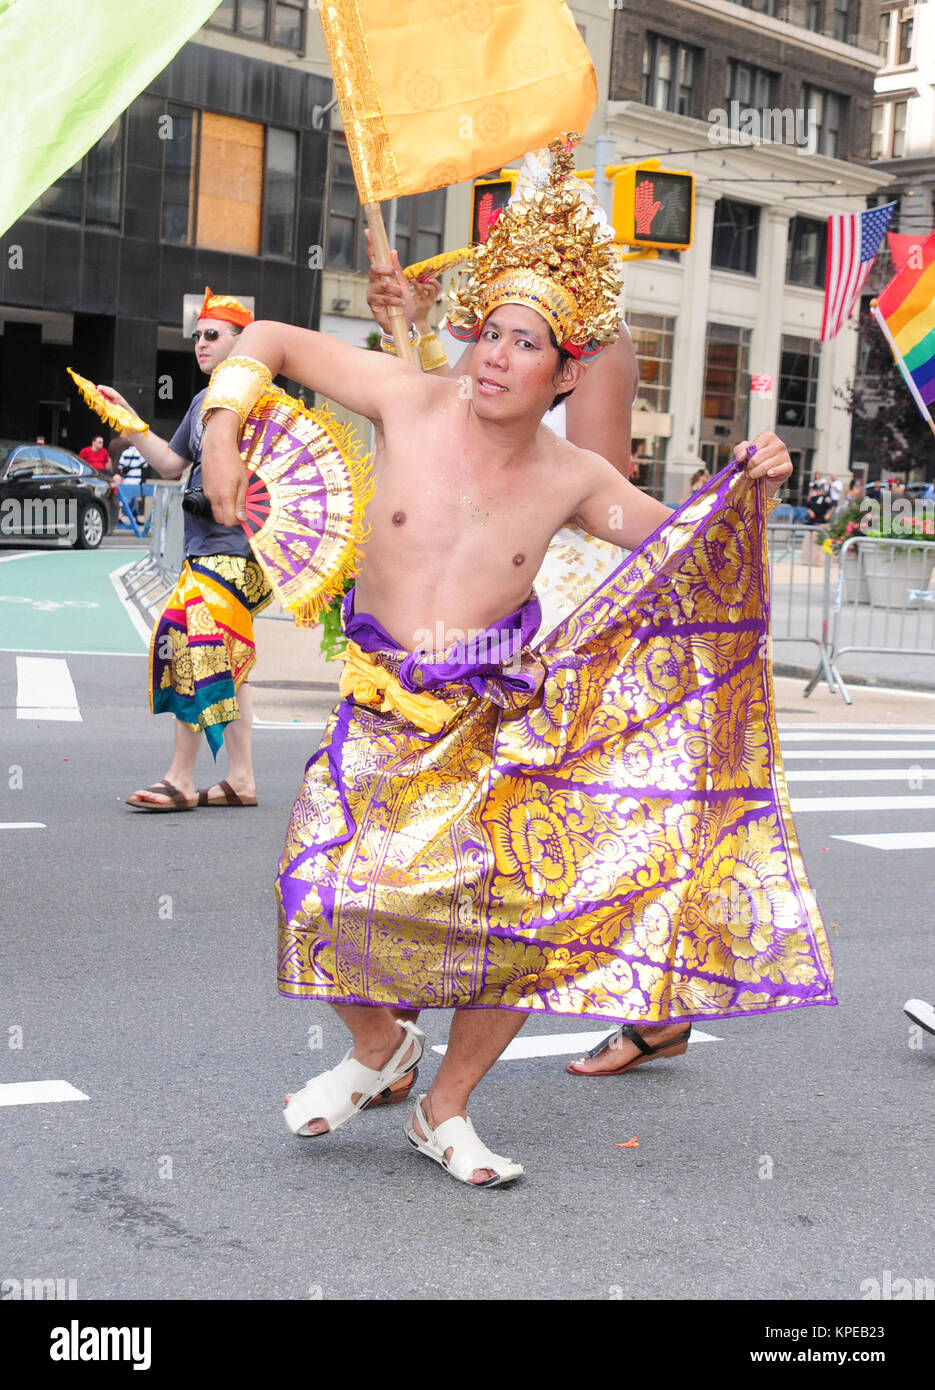 NEW YORK - JUNE 28: Atmosphere during the 2009 New York City Gay Pride Parade on the Streets of Manhattan on June 28, 2009 in New York City  People:  Gay Pride Parade Stock Photo